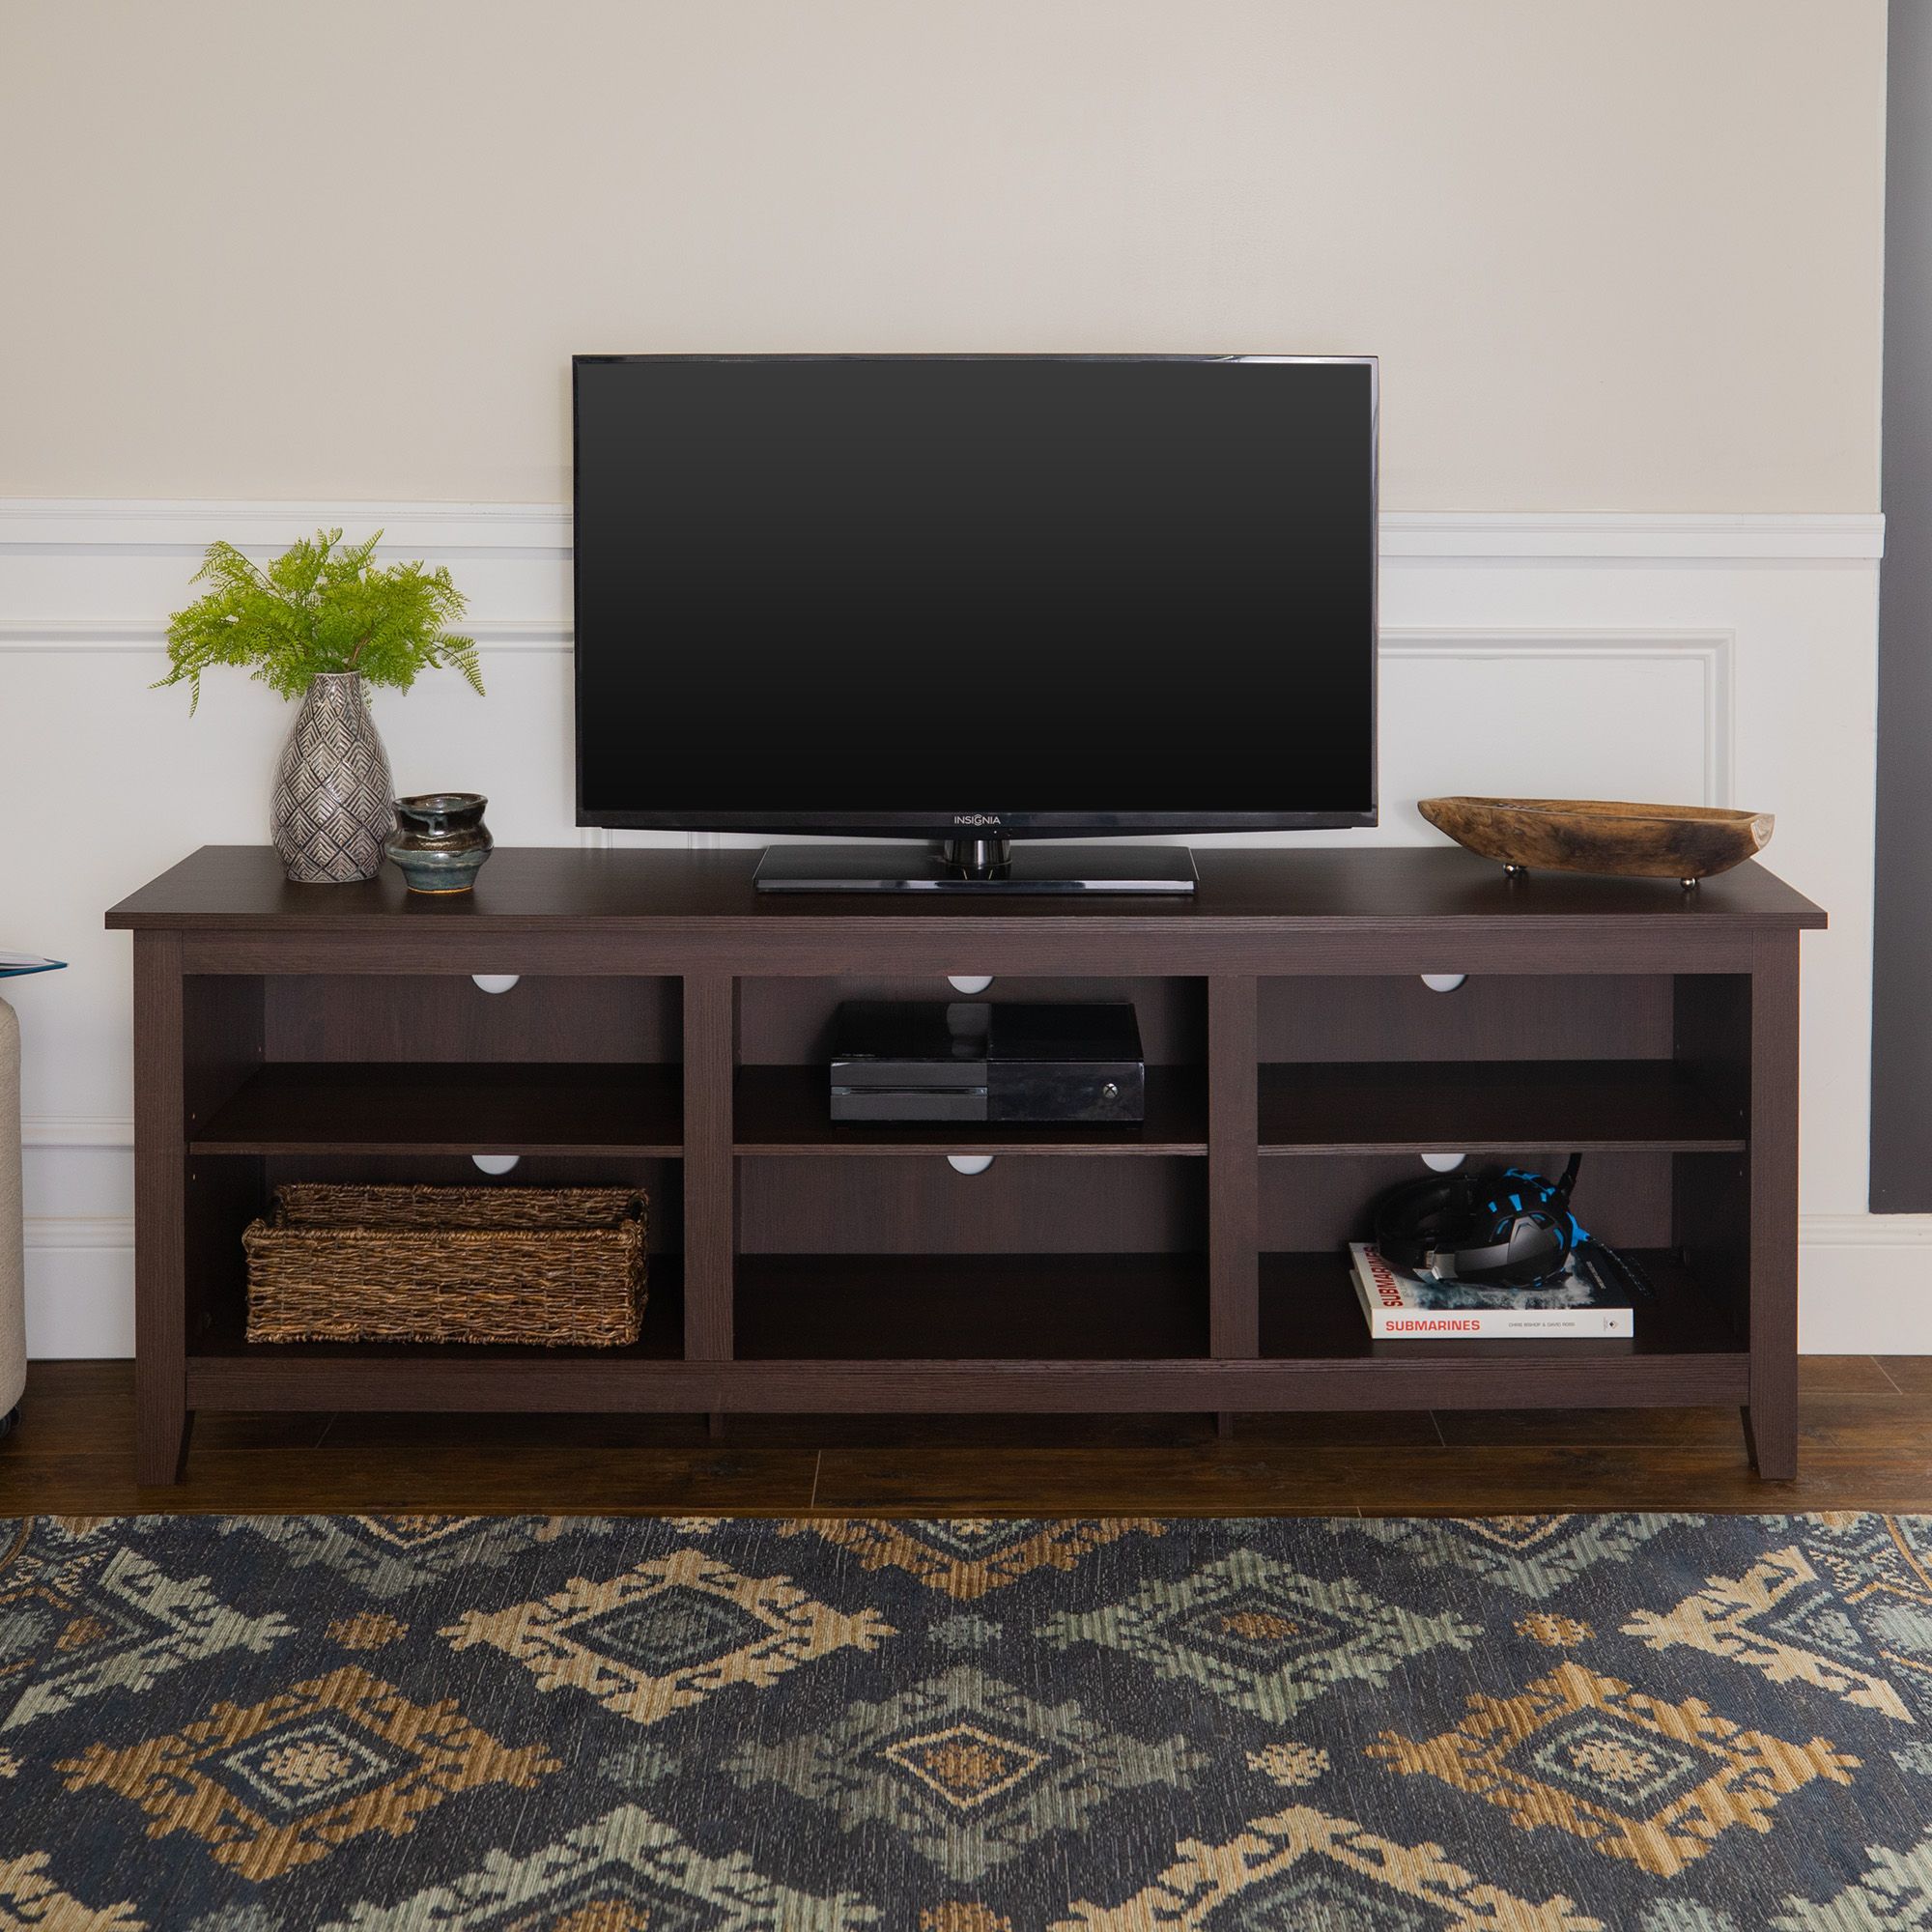 Walker Edison Wood Tv Media Storage Stand For Tvs Up To 70" – Espresso Within Cafe Tv Stands With Storage (Gallery 1 of 20)